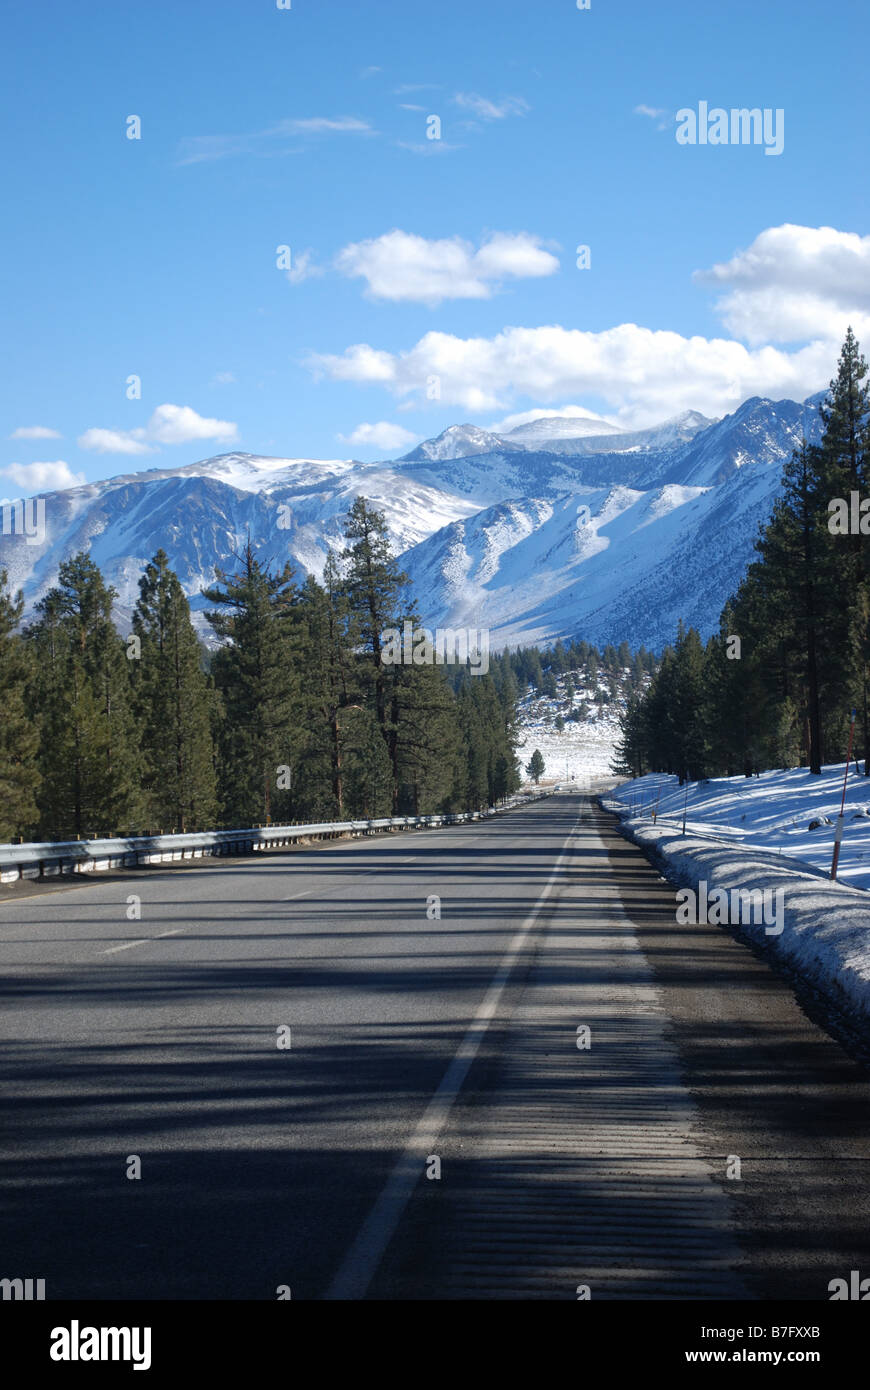 Eastern slope of the Sierra Nevada in California near Tom s Place and Mammoth on US highway 395 Stock Photo